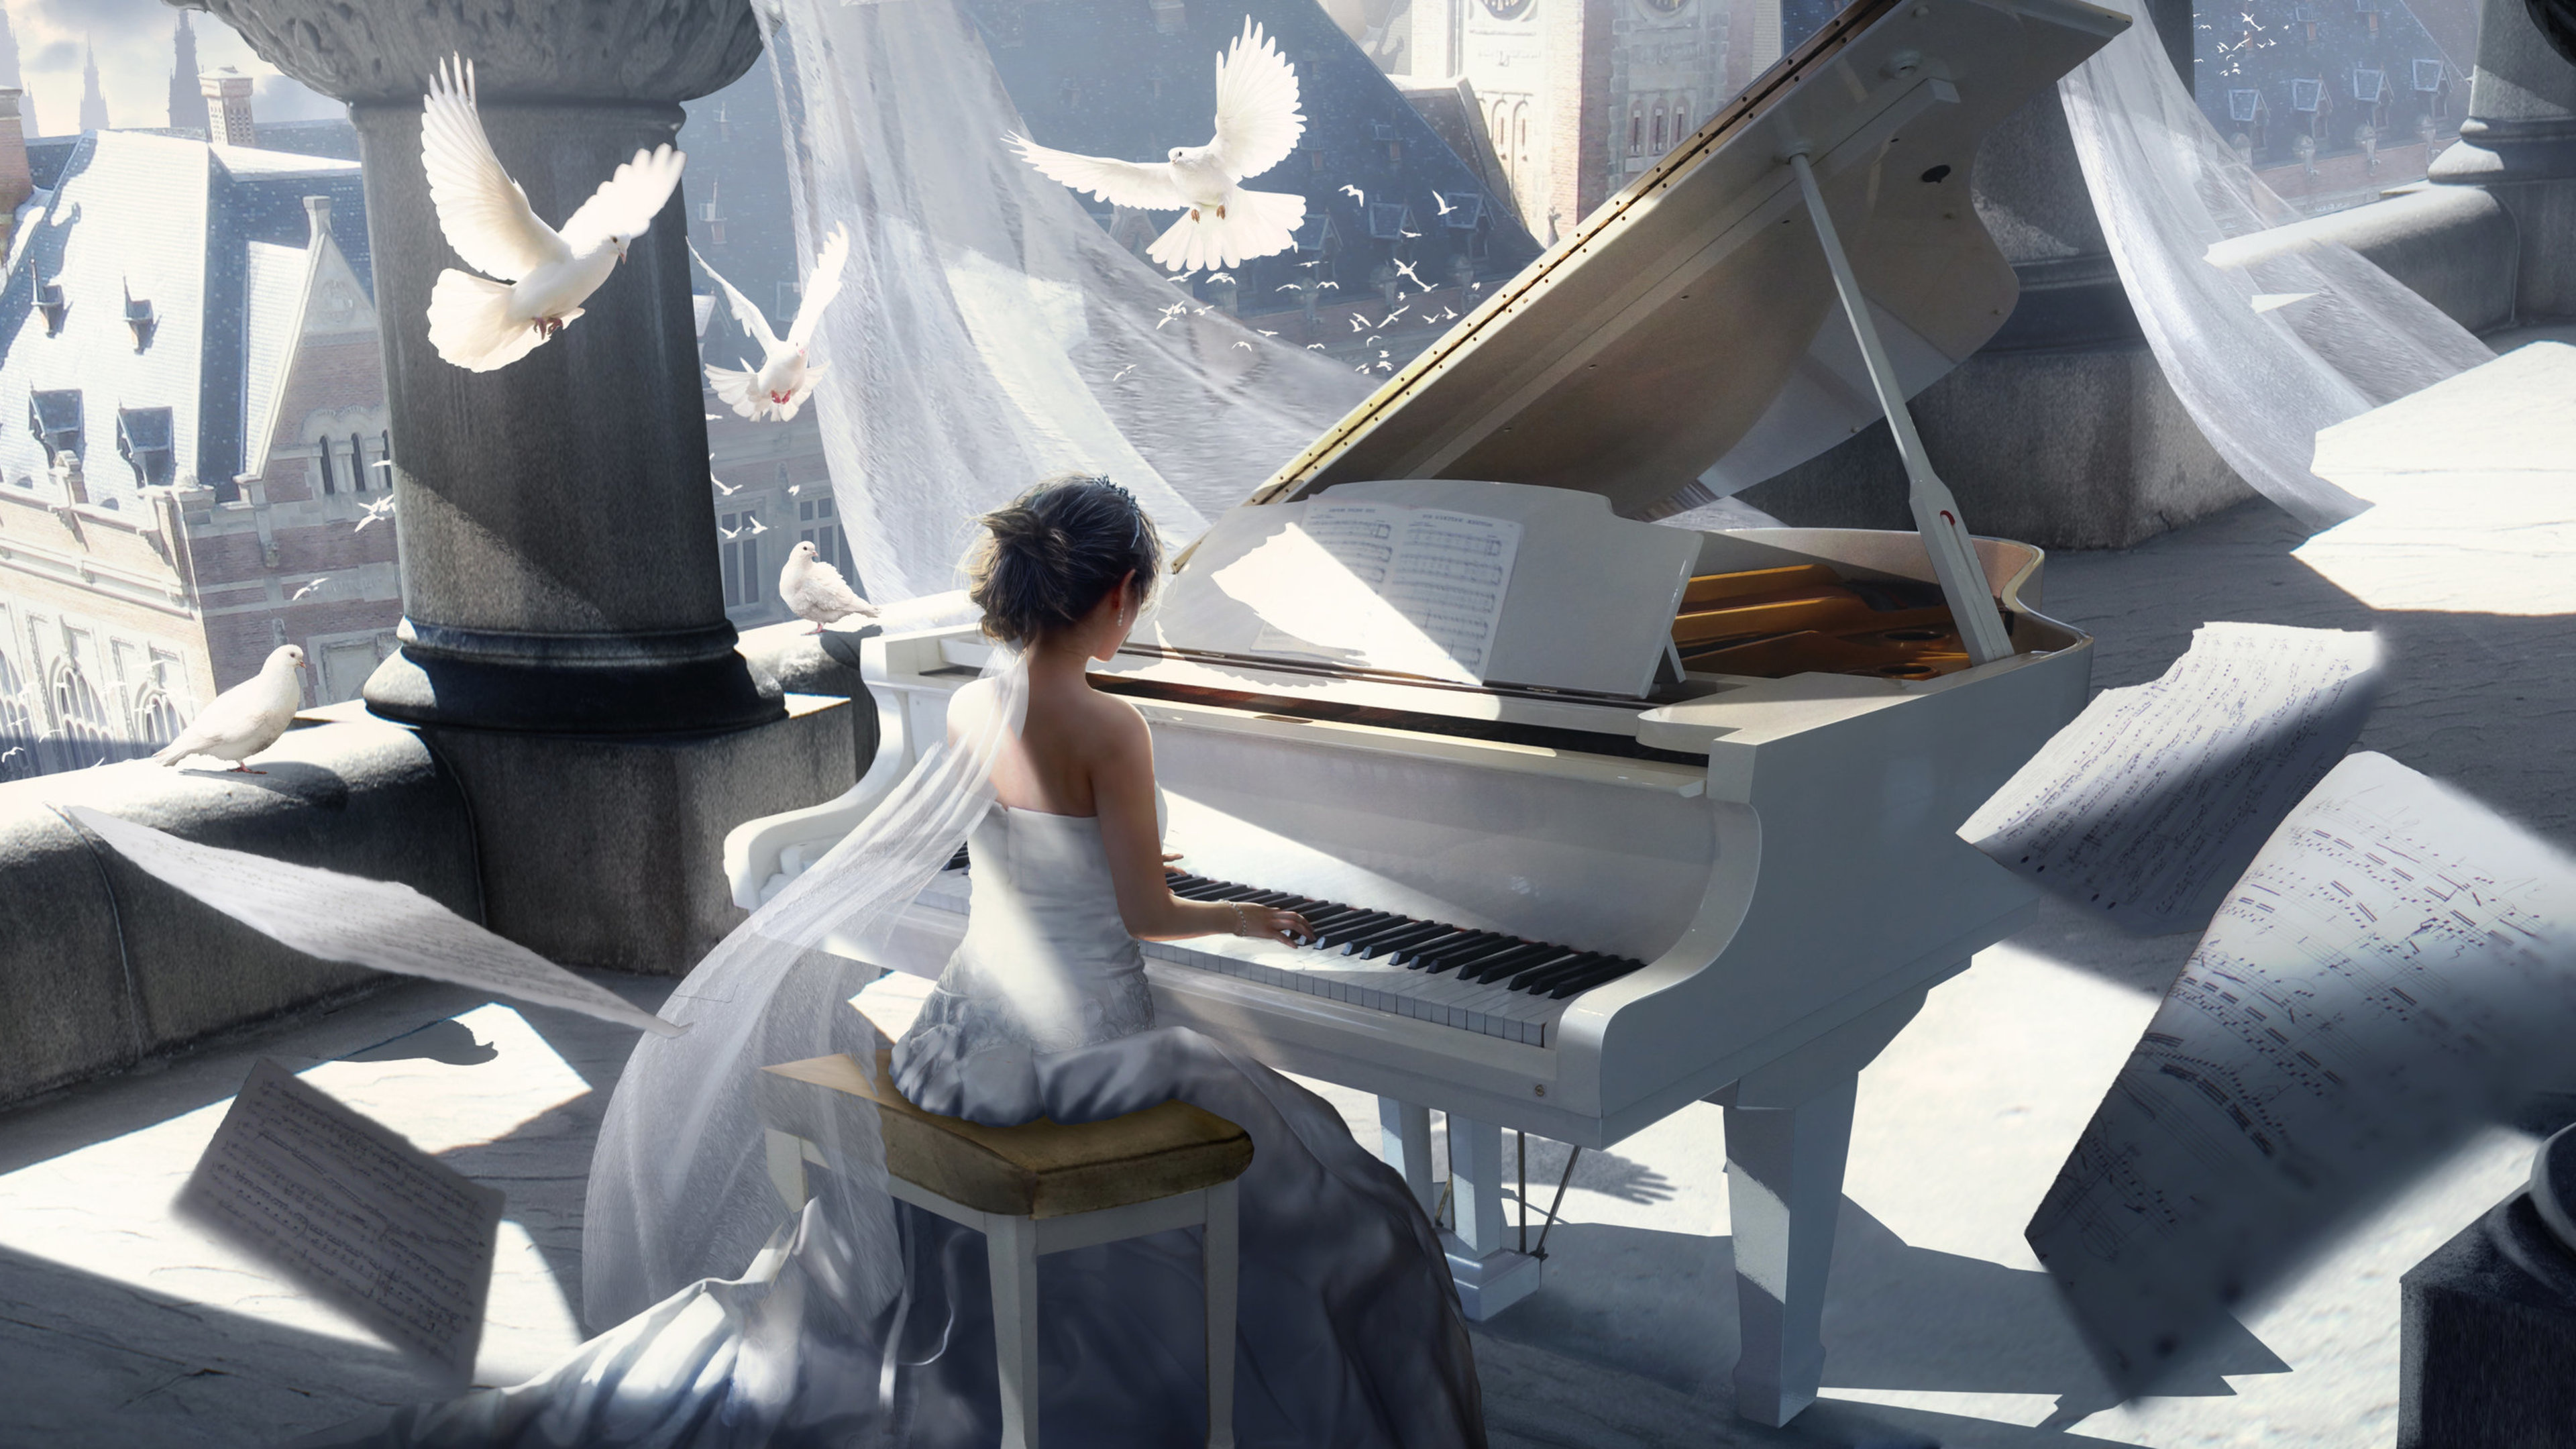 Grand Piano: White doves, Sheet music, Music instrument, played using a keyboard, Musician. 3840x2160 4K Wallpaper.